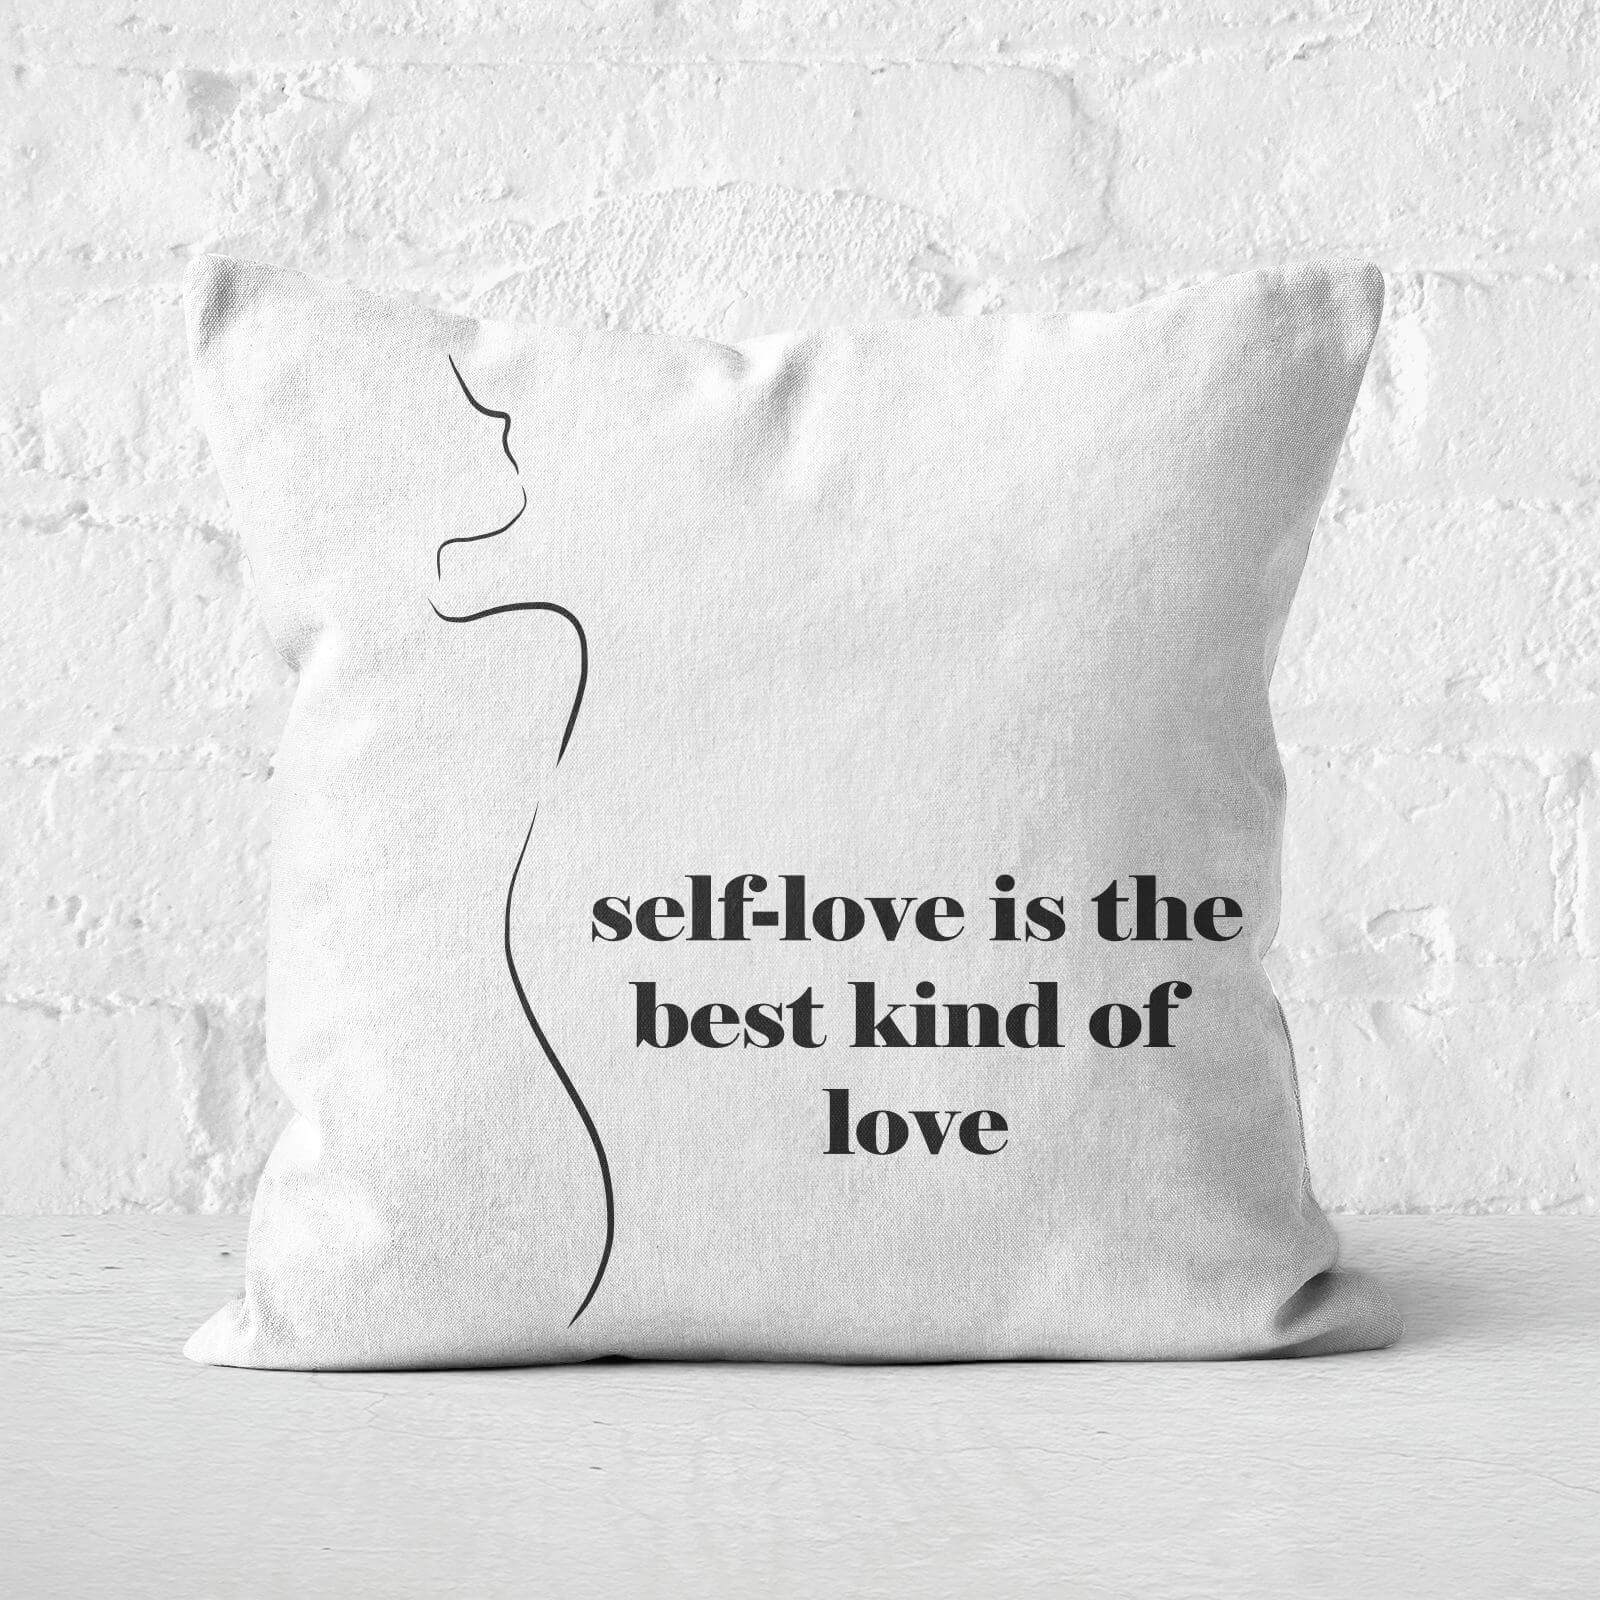 Self-Love Is The Best Kind Of Love Square Cushion - 60x60cm - Soft Touch